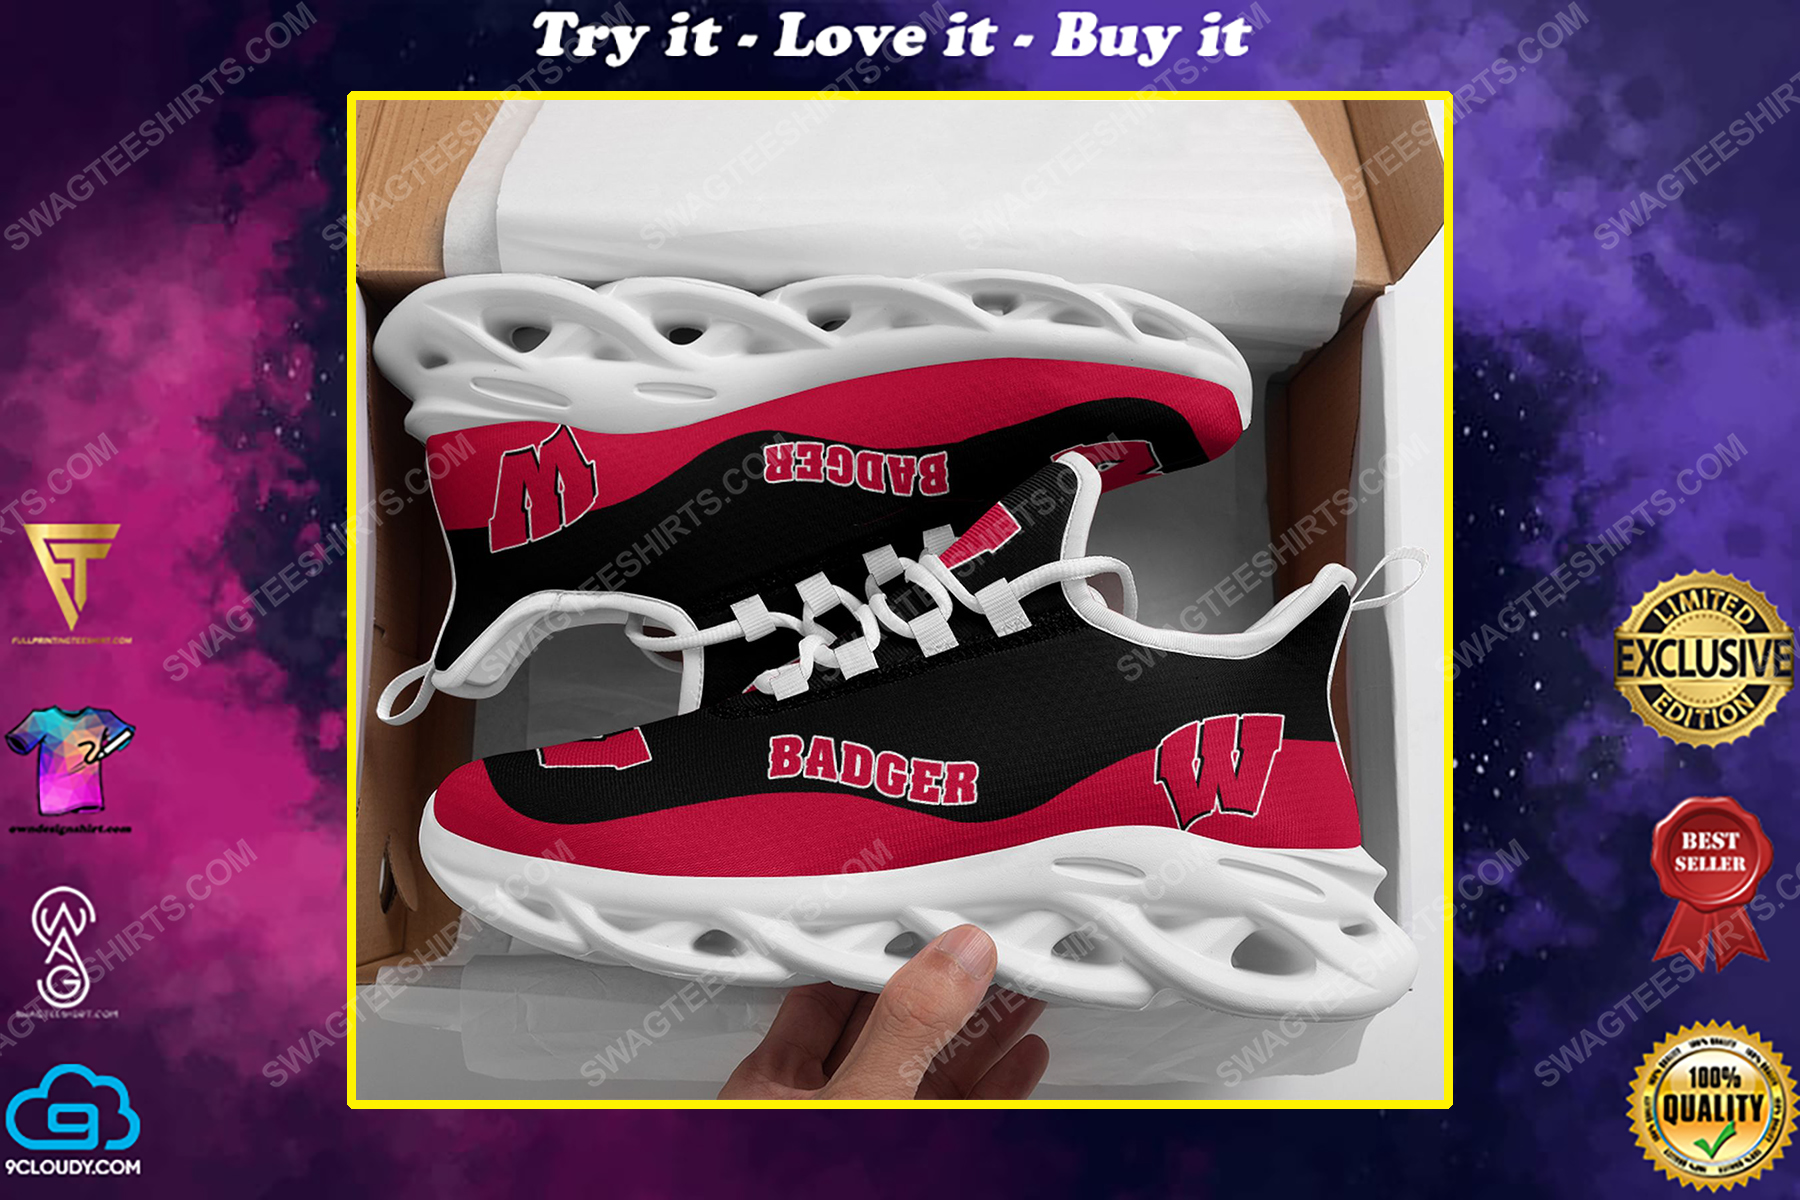 The wisconsin badgers football team max soul shoes